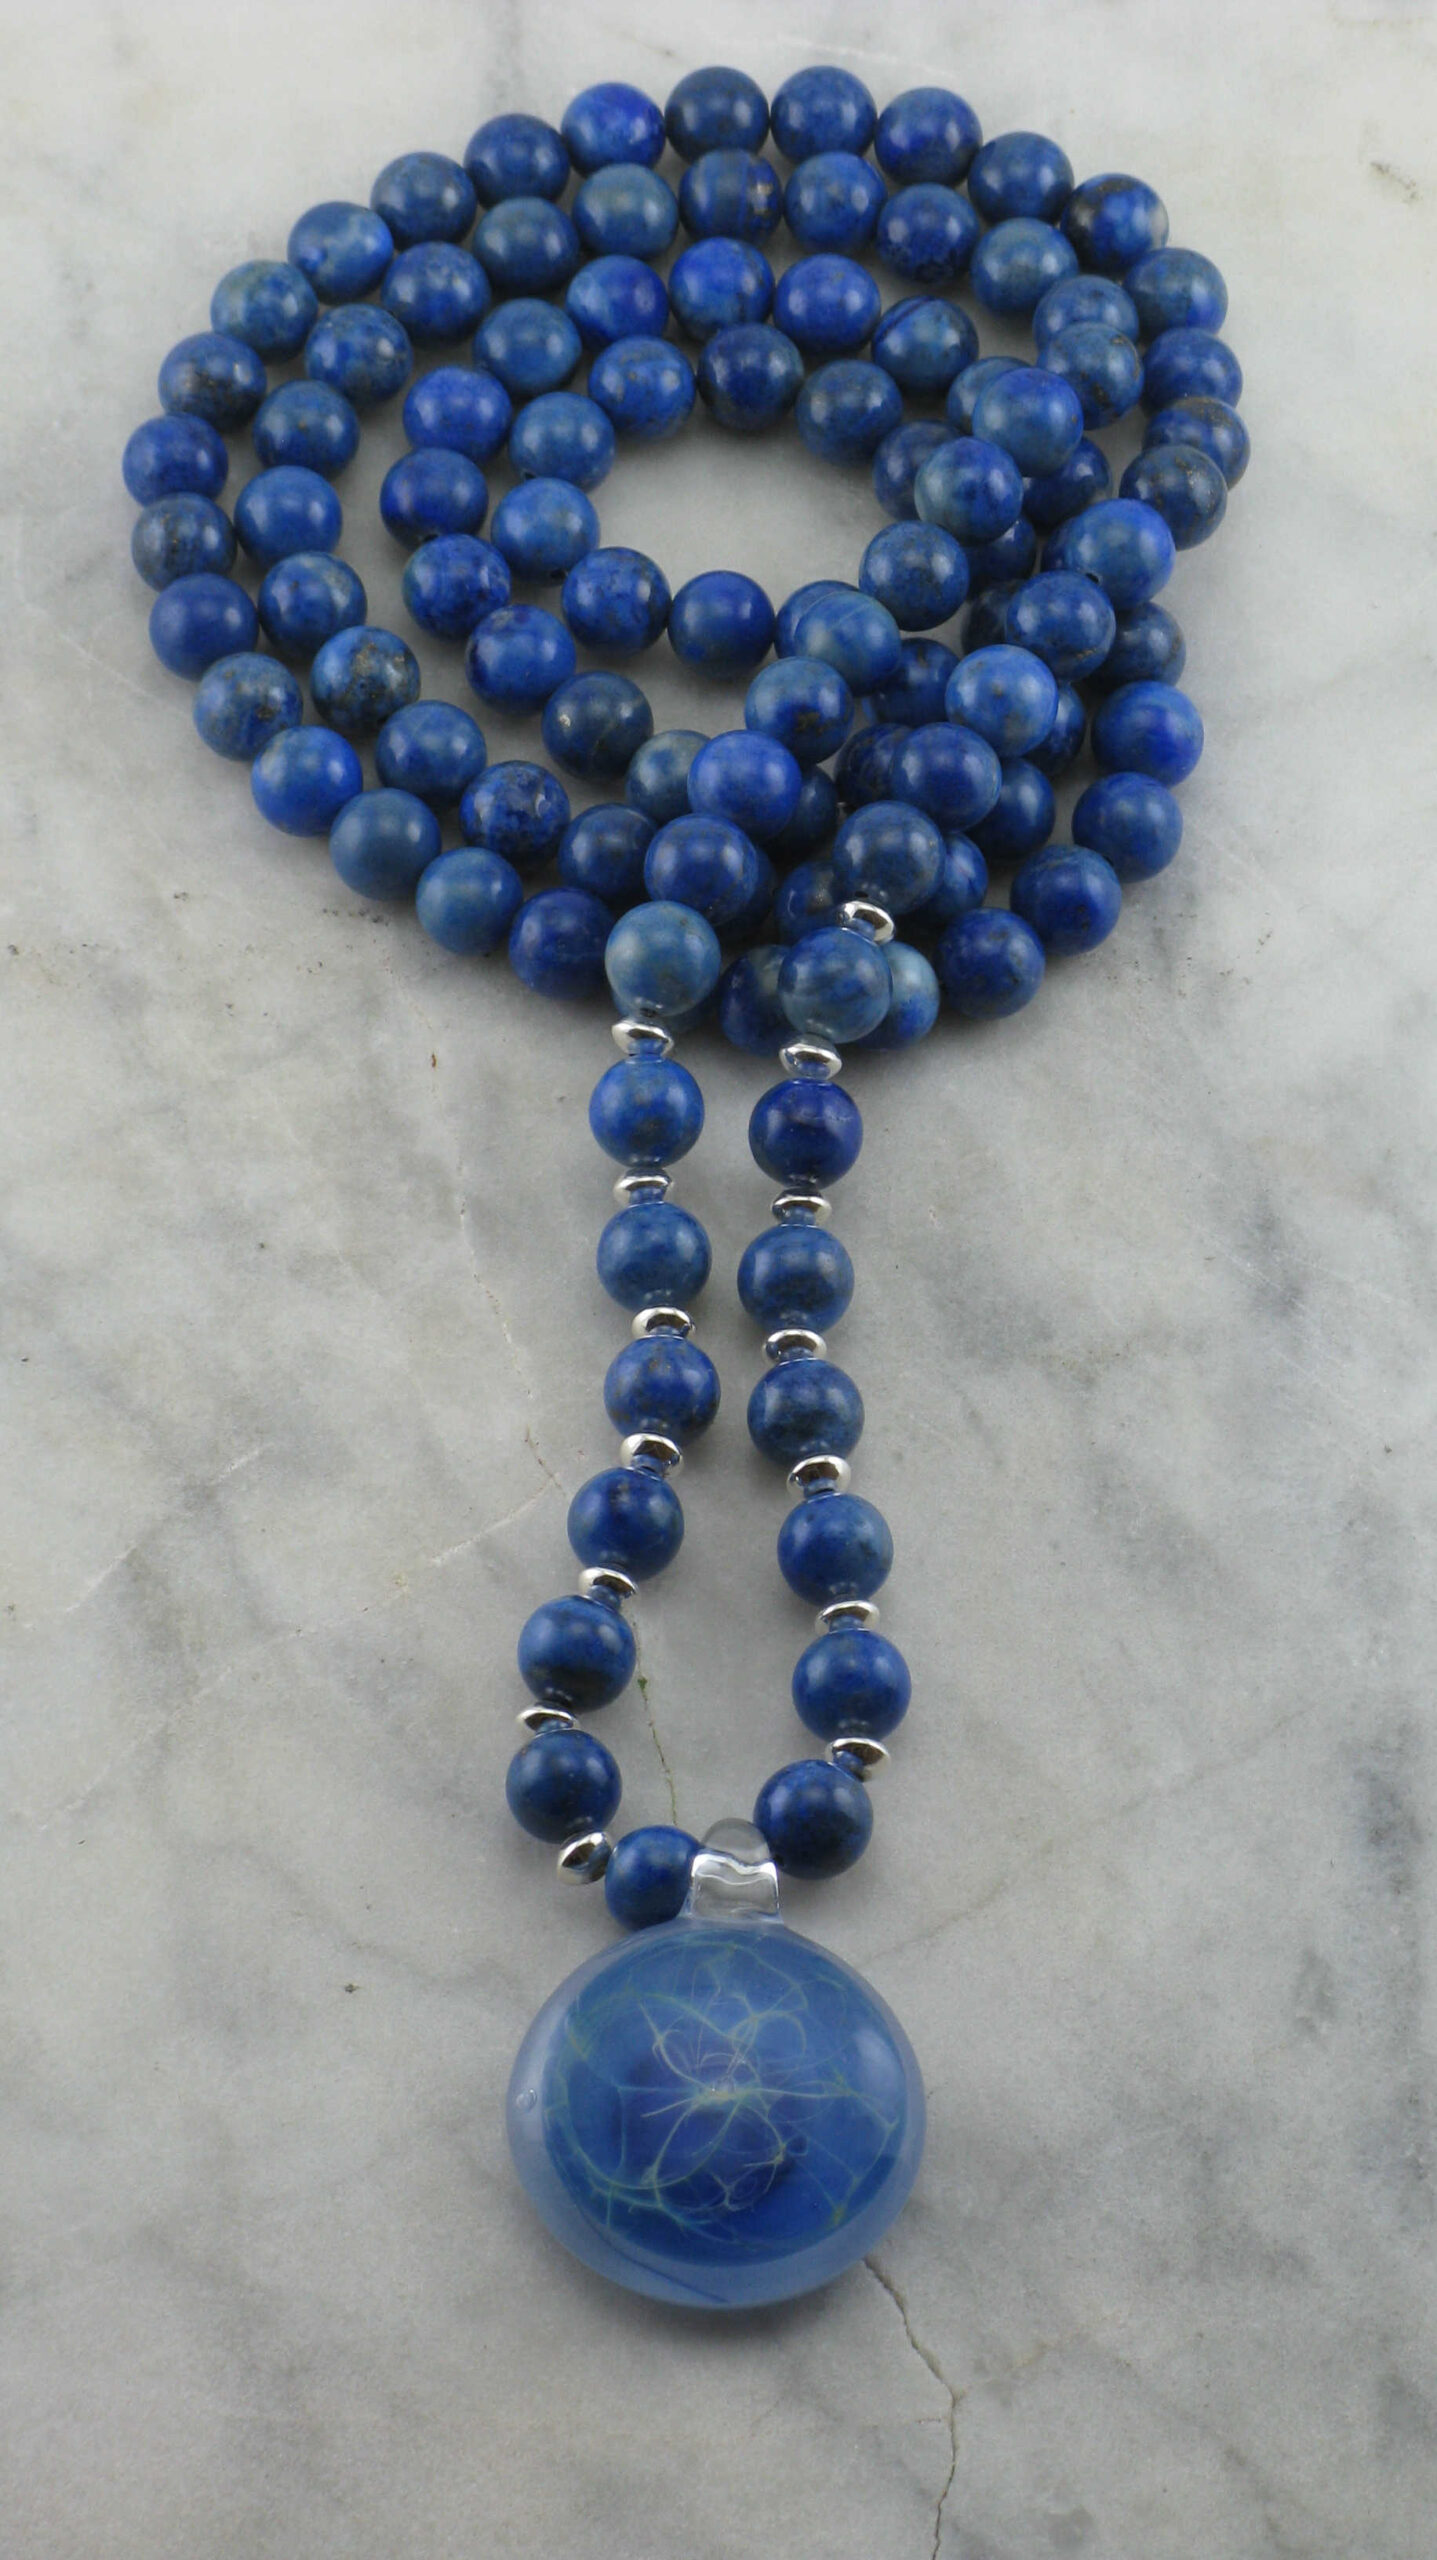 #044 Lotus Flower Om Blue Mala BLUE LAPIS Mala Bead Necklace with Sterling Silver OM Charm Meditation Necklace Yoga Inspired Jewelry